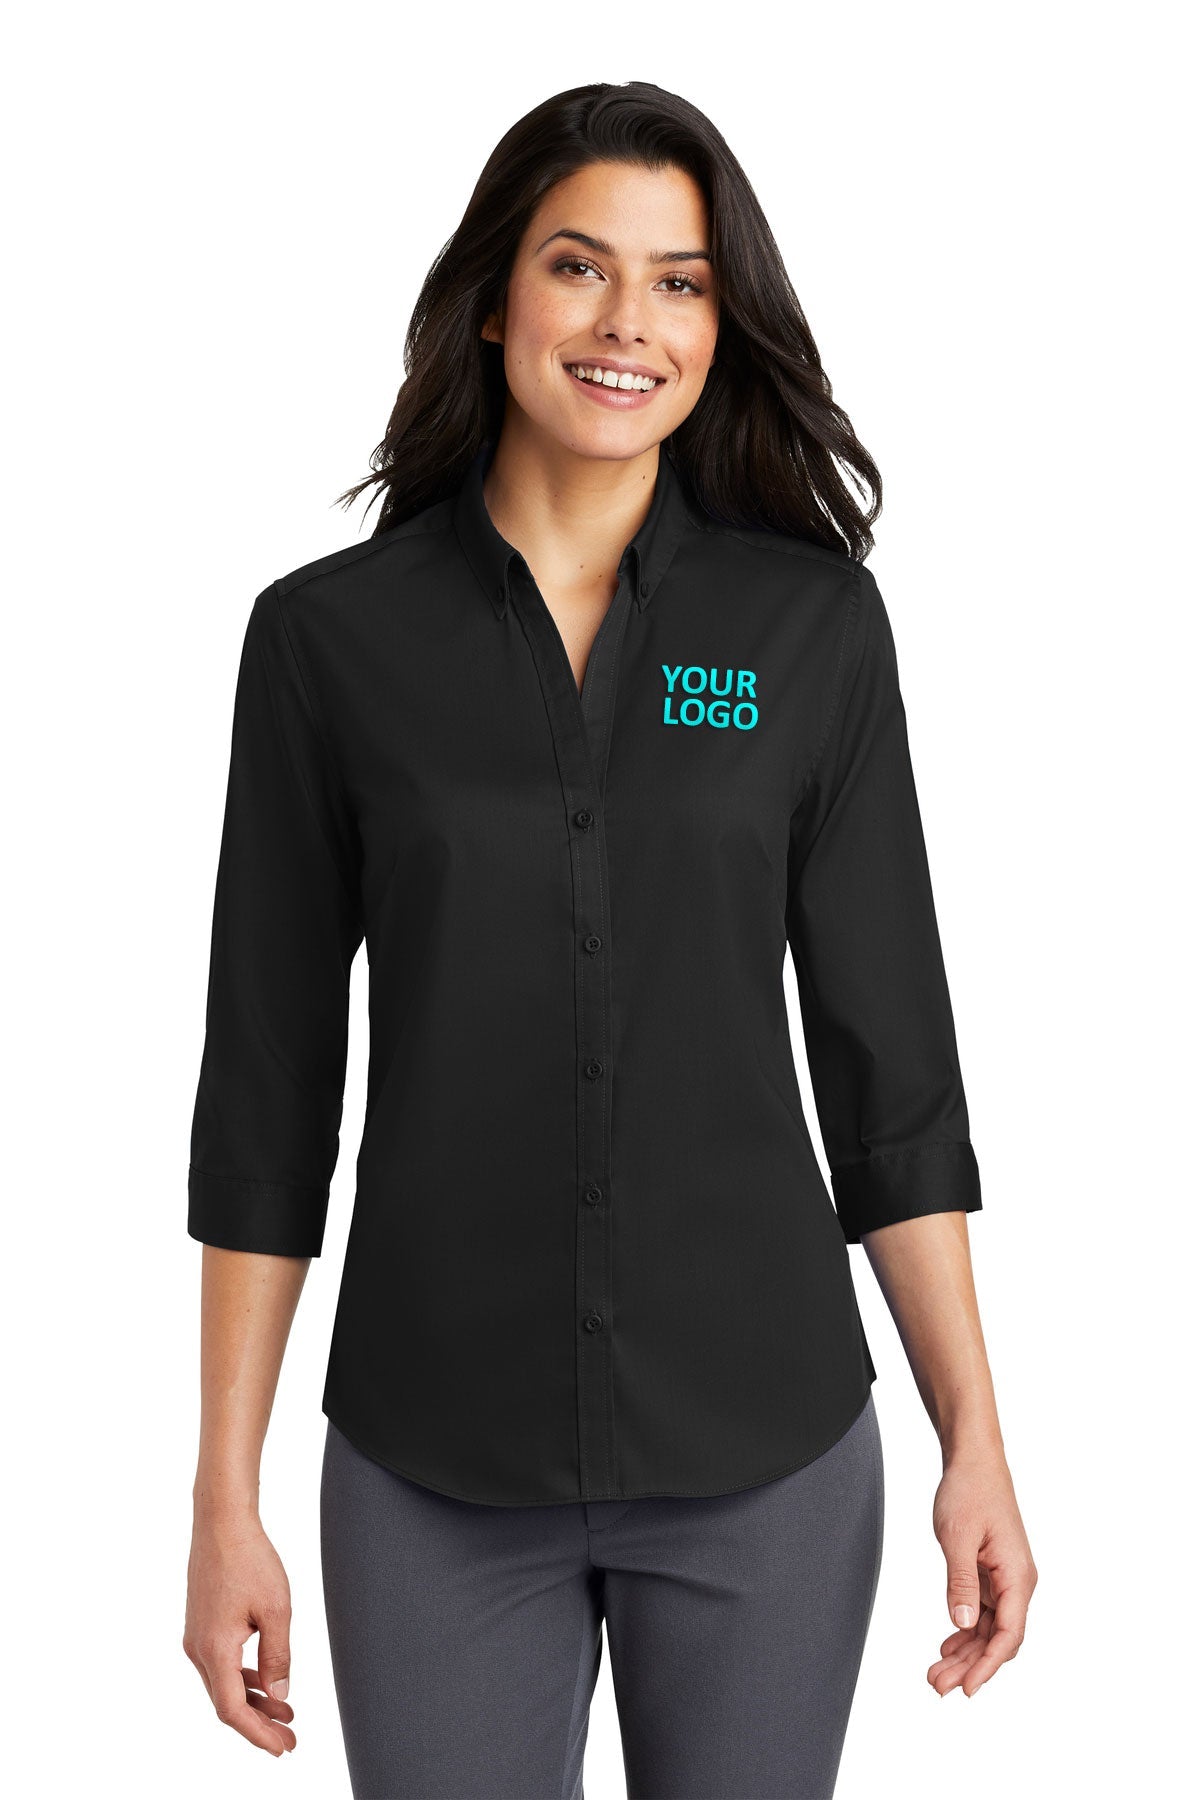 Port Authority Black L665 work shirts with logo